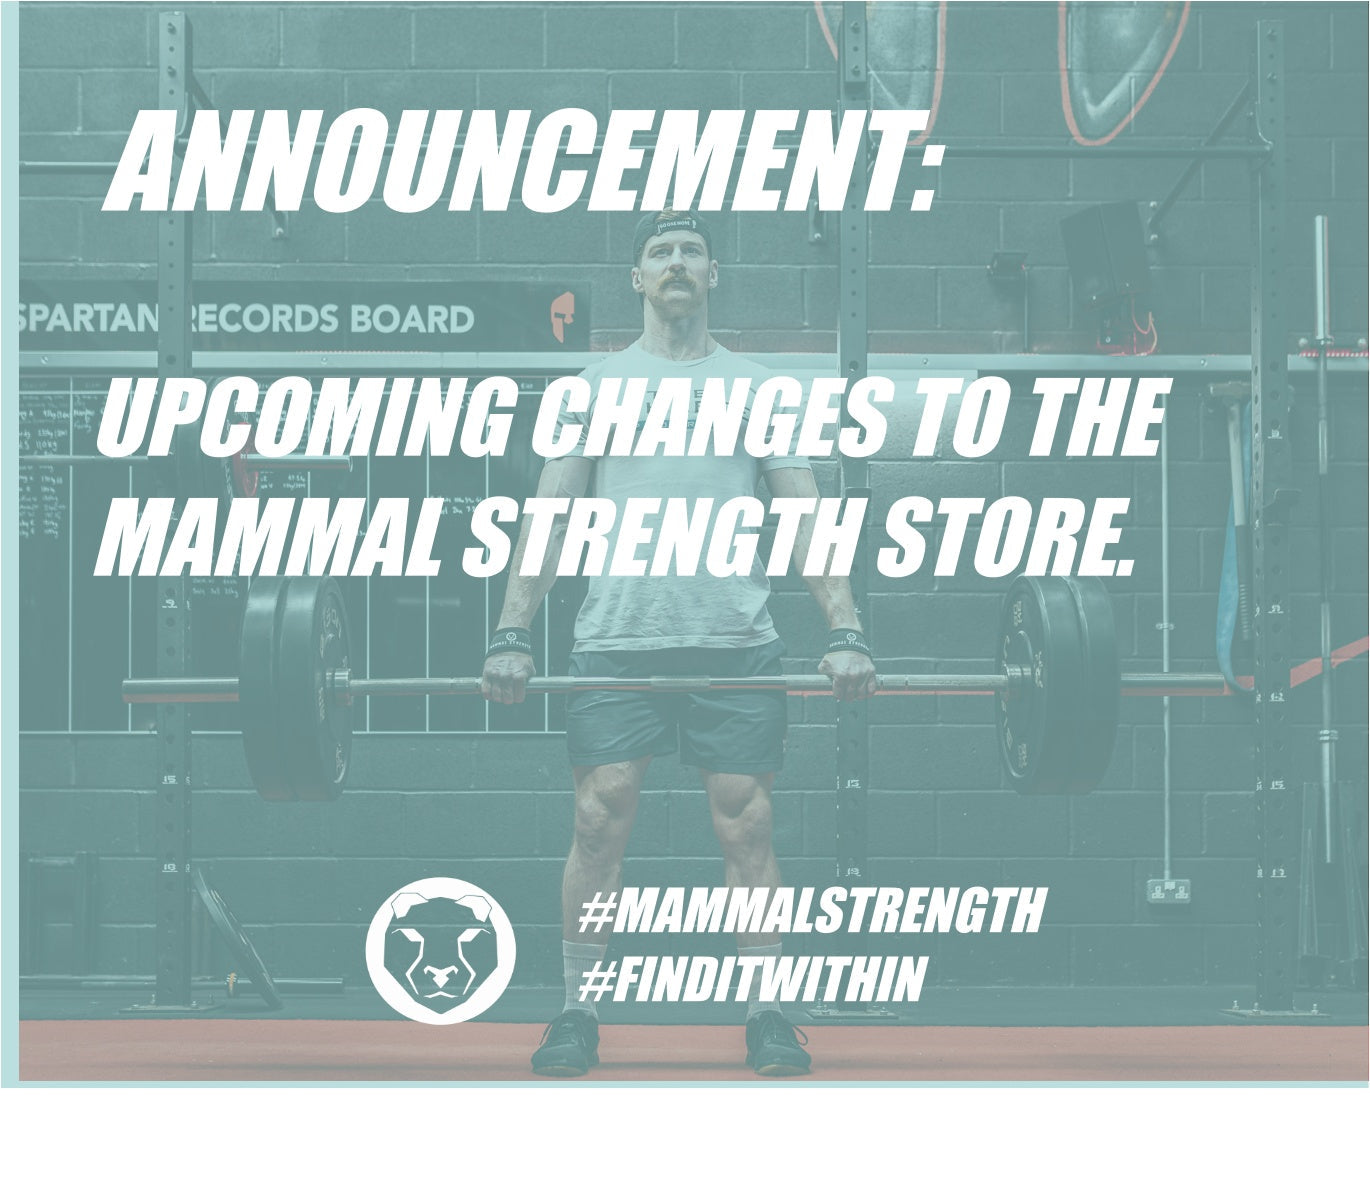 ANNOUNCEMENT: UPCOMING CHANGES TO THE MAMMAL STRENGTH STORE. - Mammal Strength